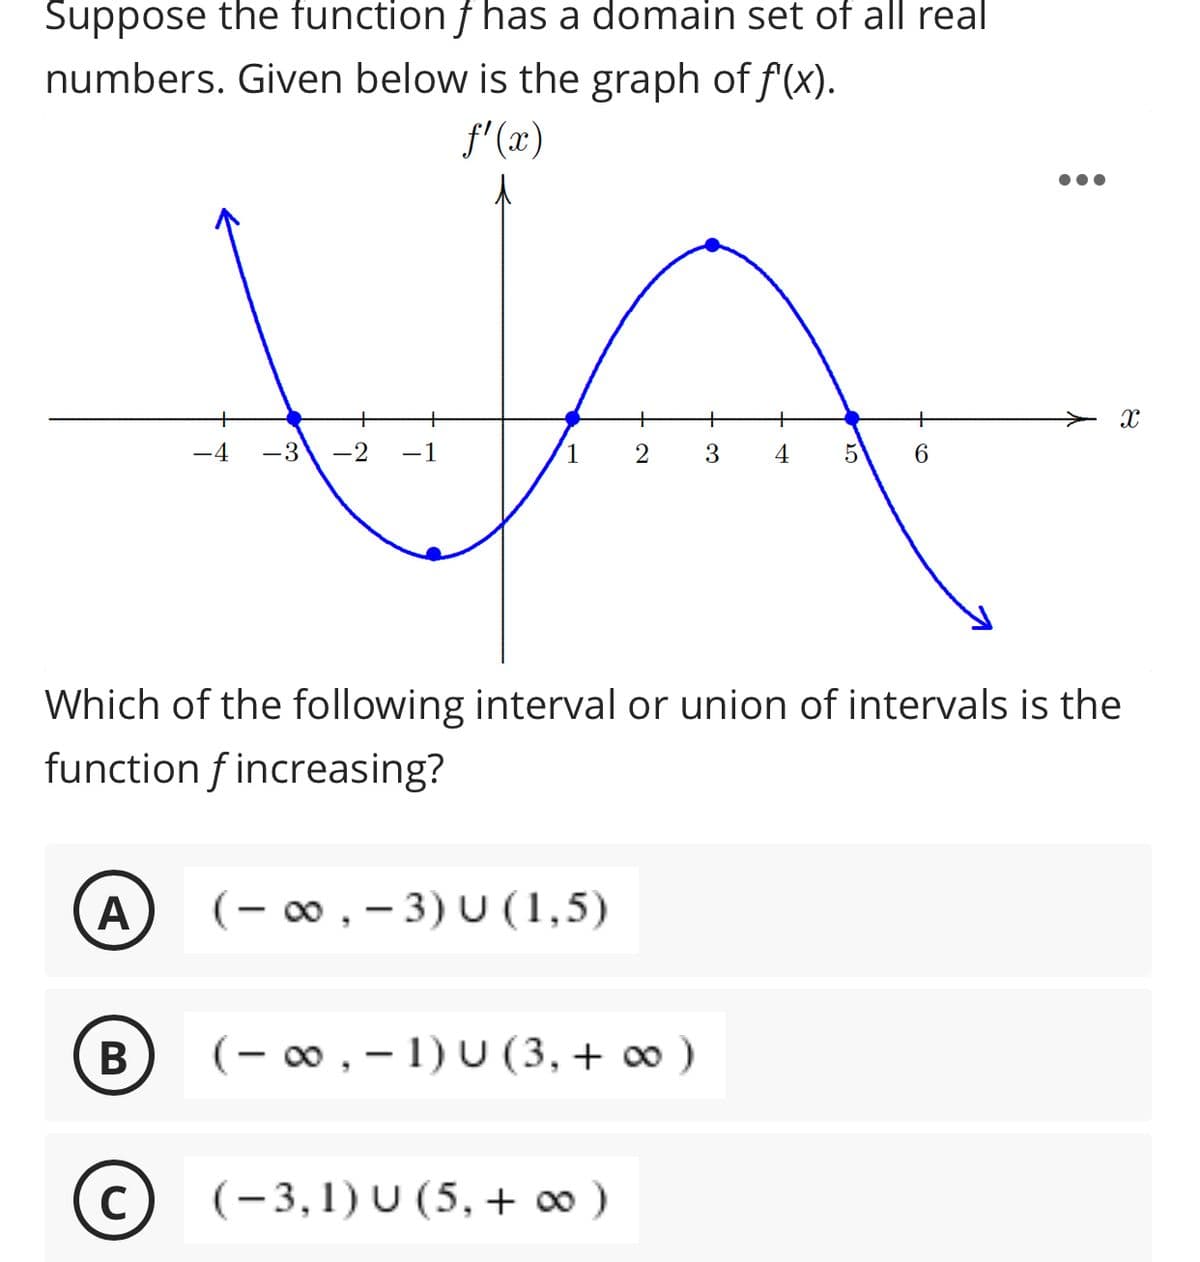 Suppose the function f has a domain set of all real
numbers. Given below is the graph of f(x).
f'(x)
+
-4
-3
-2
-1
1
3
5
6
Which of the following interval or union of intervals is the
function f increasing?
A
(– ∞ , – 3) U (1,5)
B
(- 00 , - 1) U (3, + 0 )
(c) (-3,1) U (5, + ∞ )
